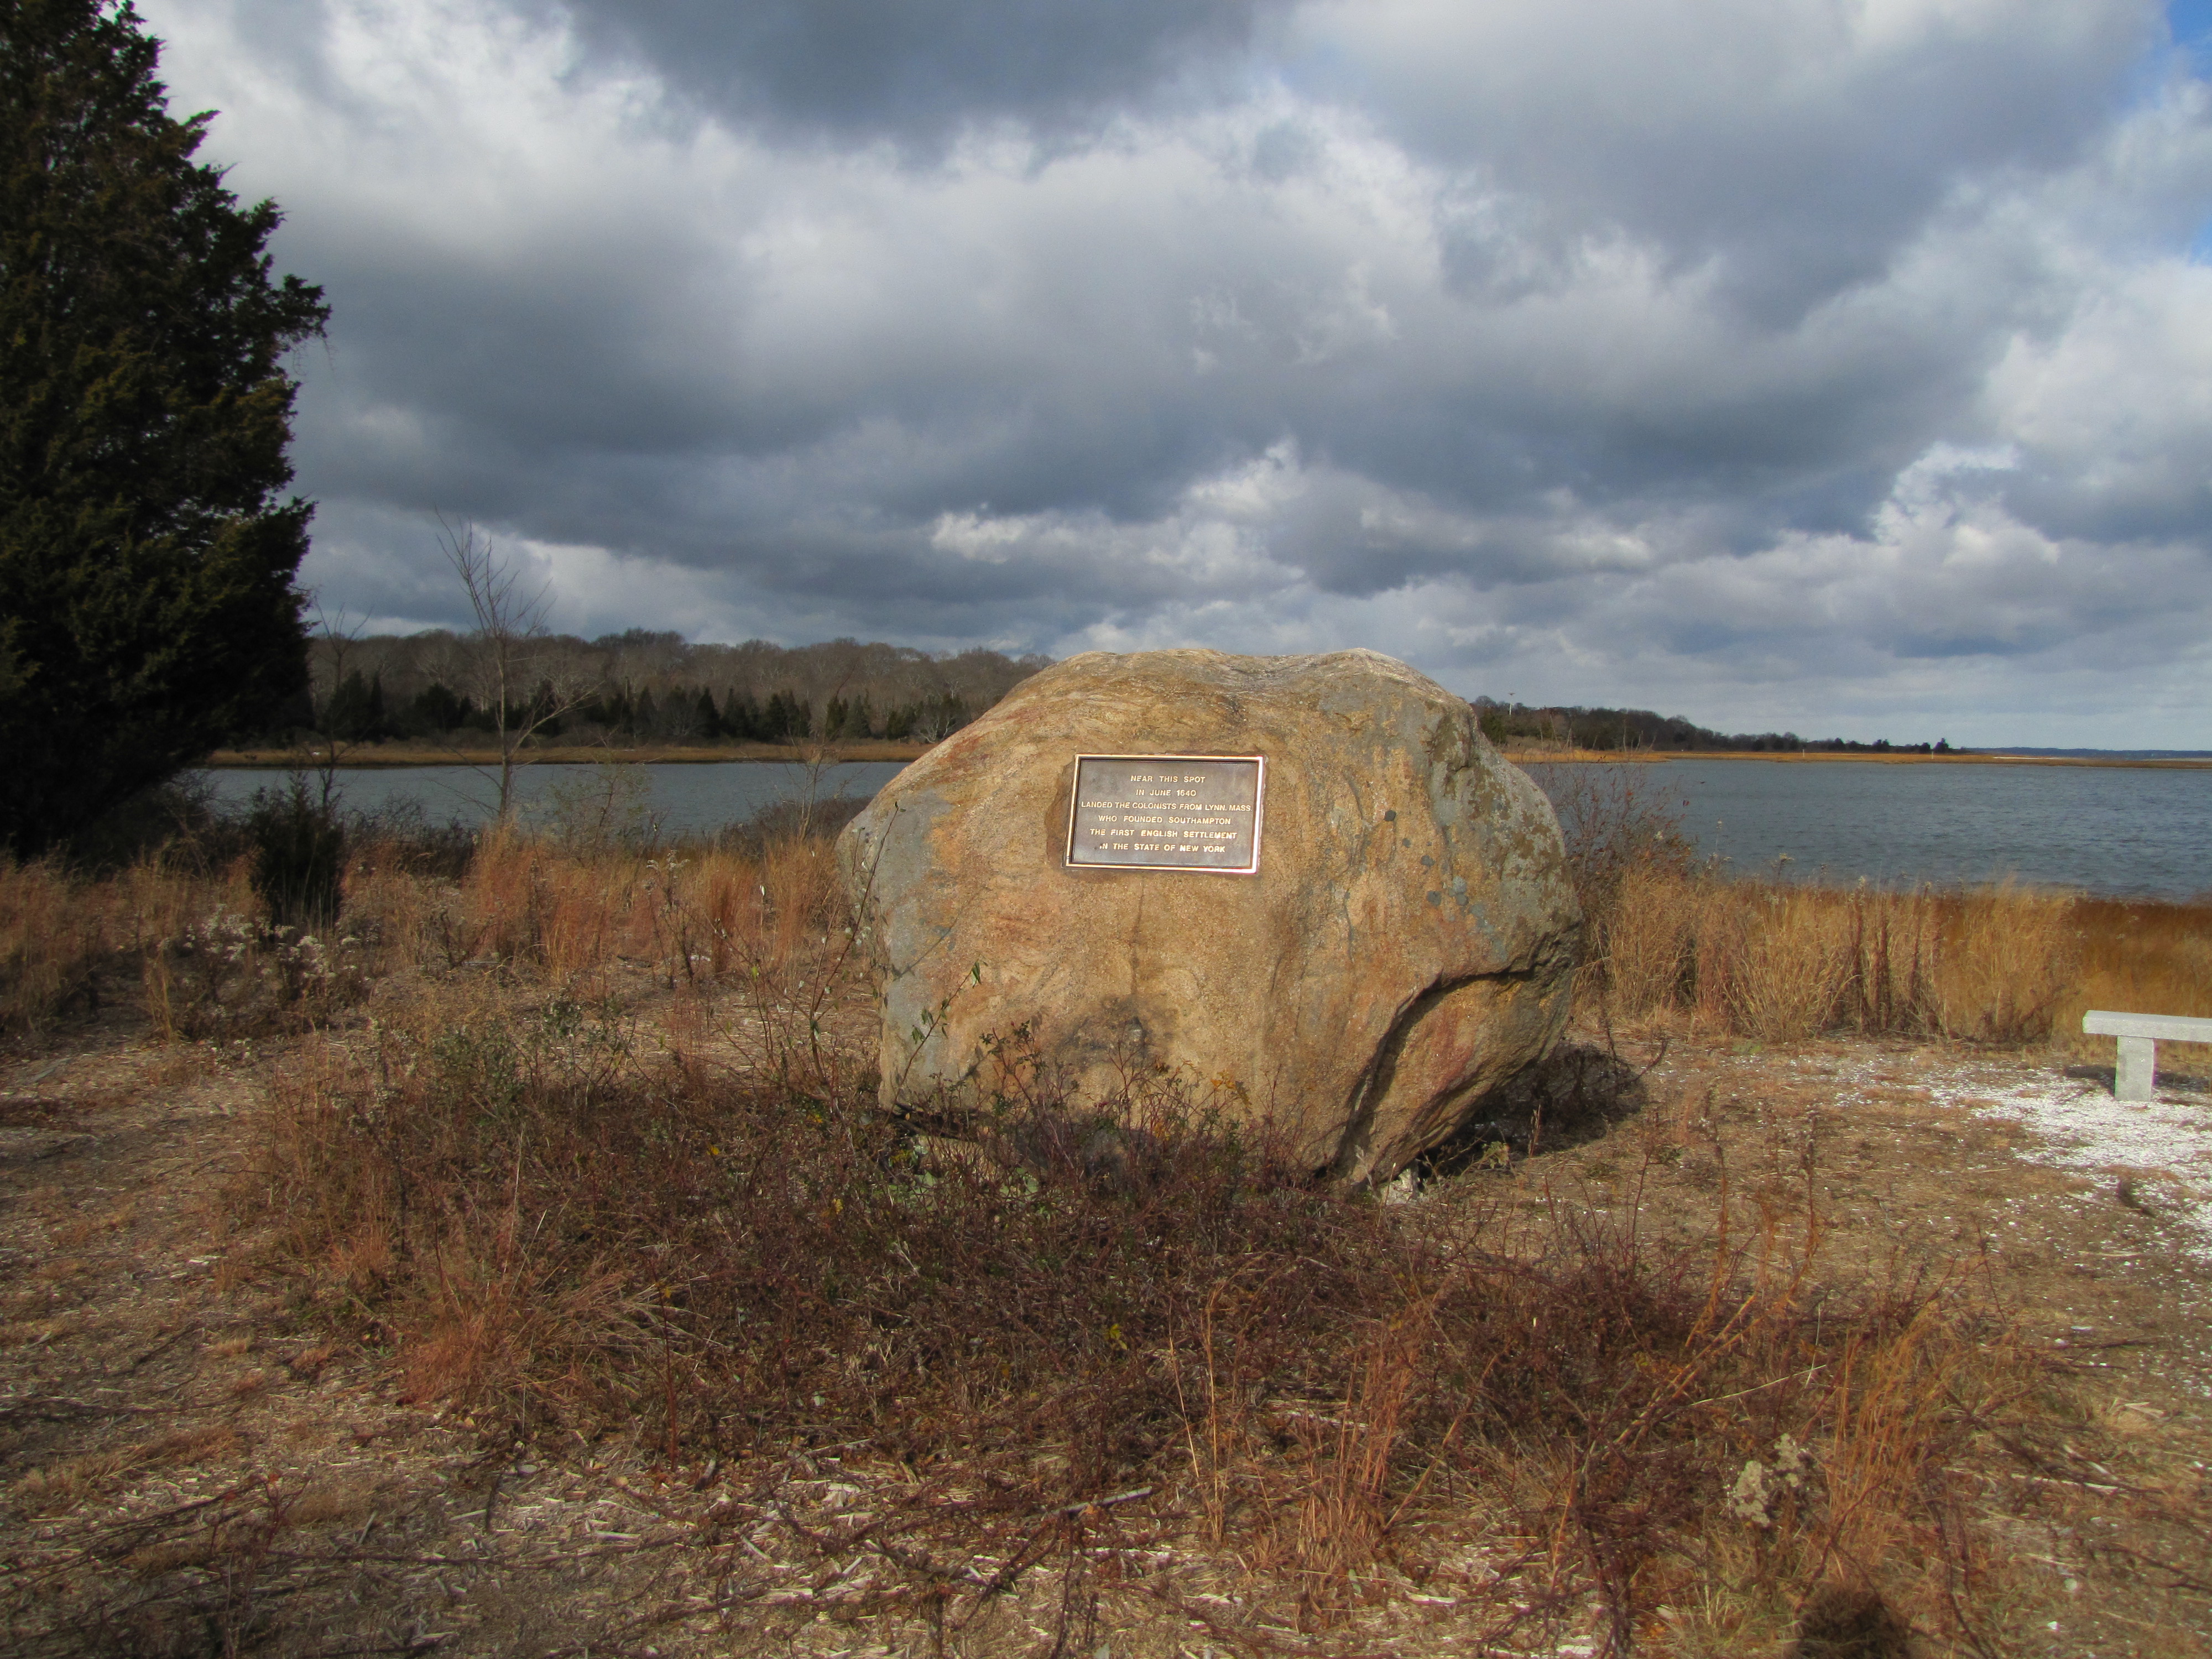 A historical monument documenting the first landing of English settlers in New York